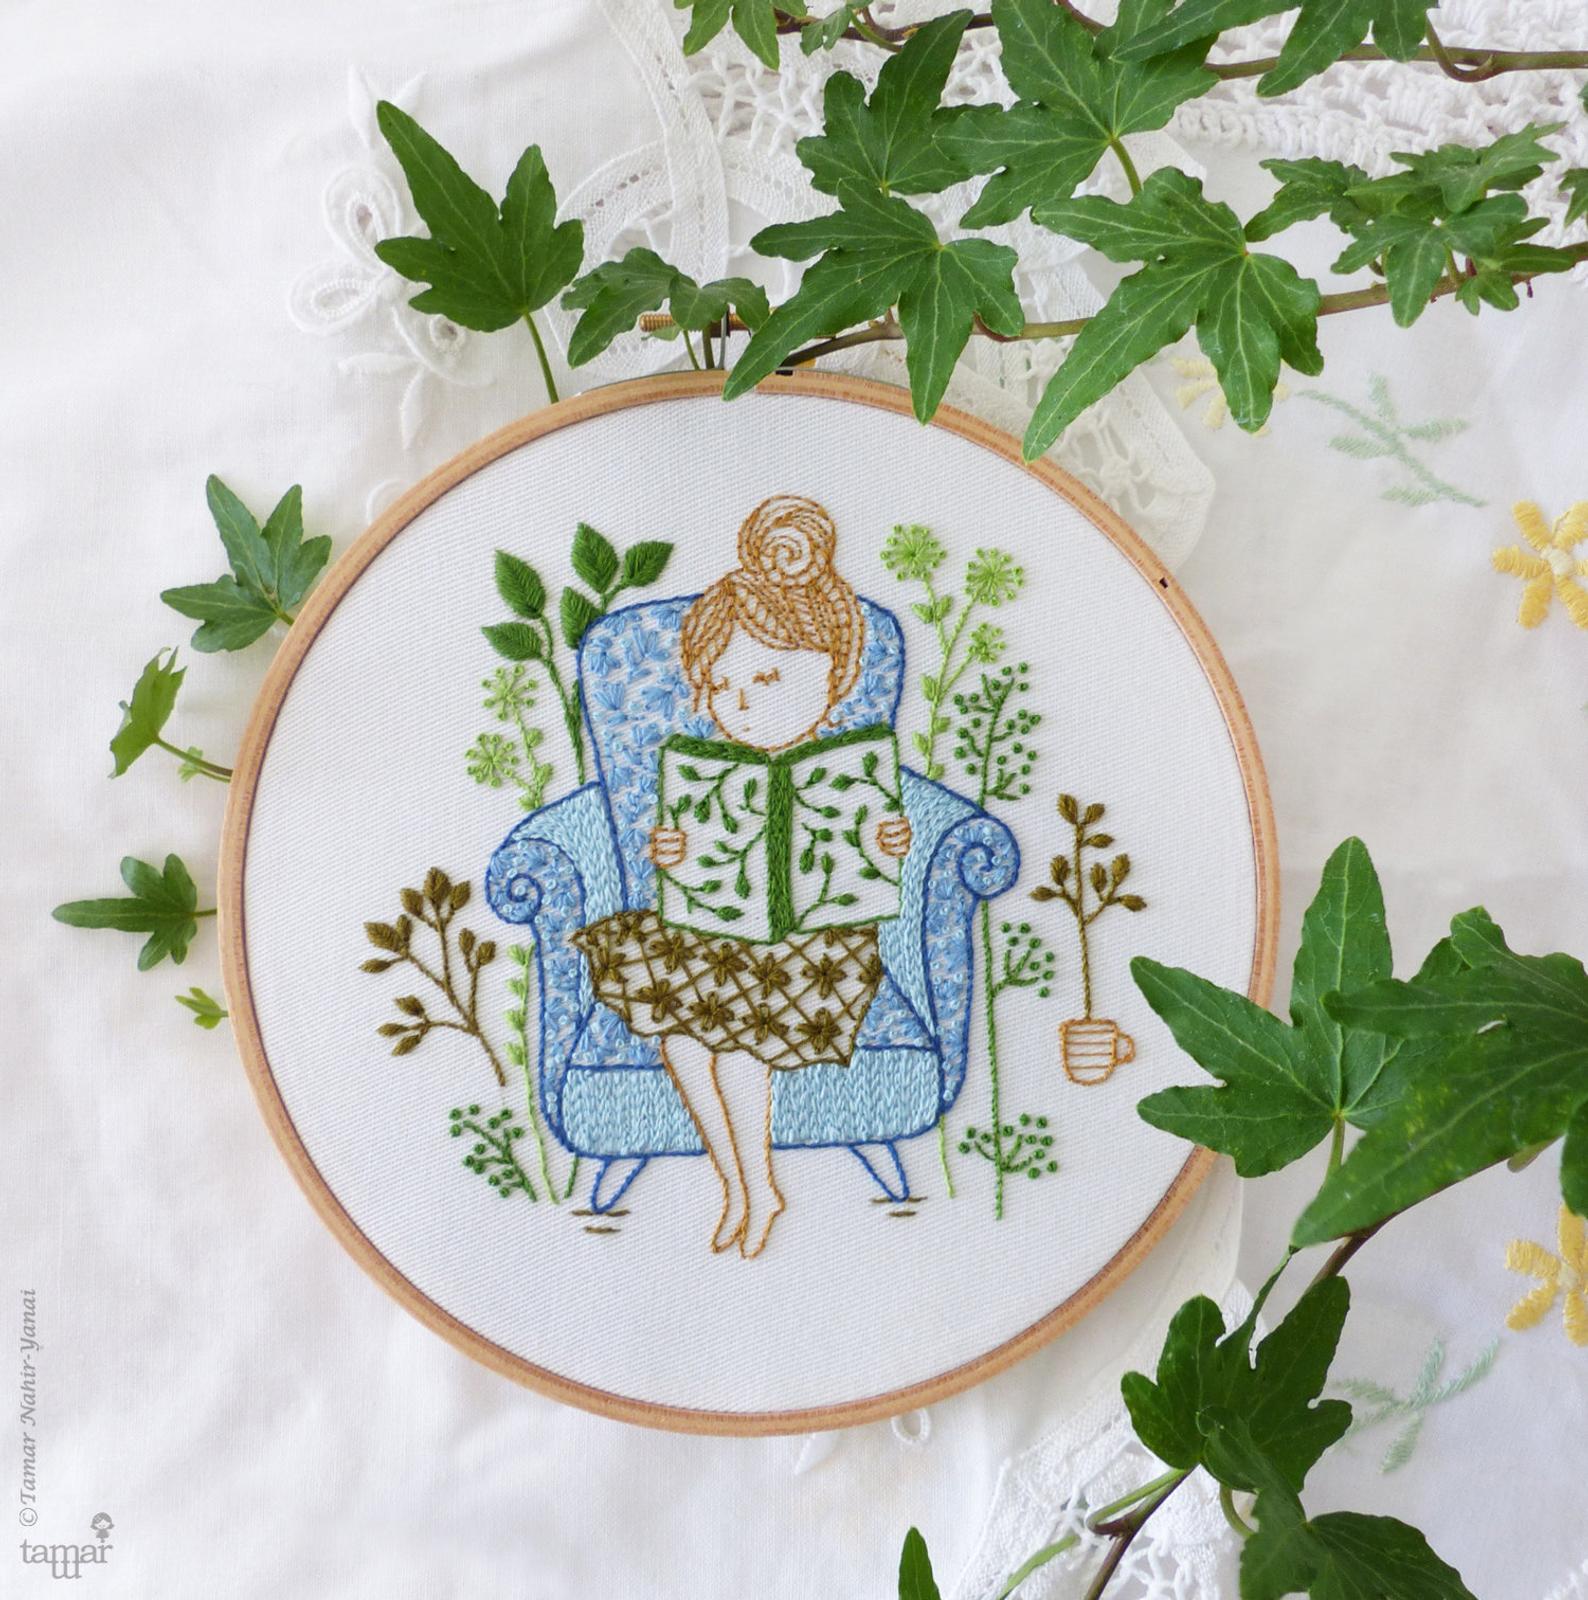 book lover embroidery pattern